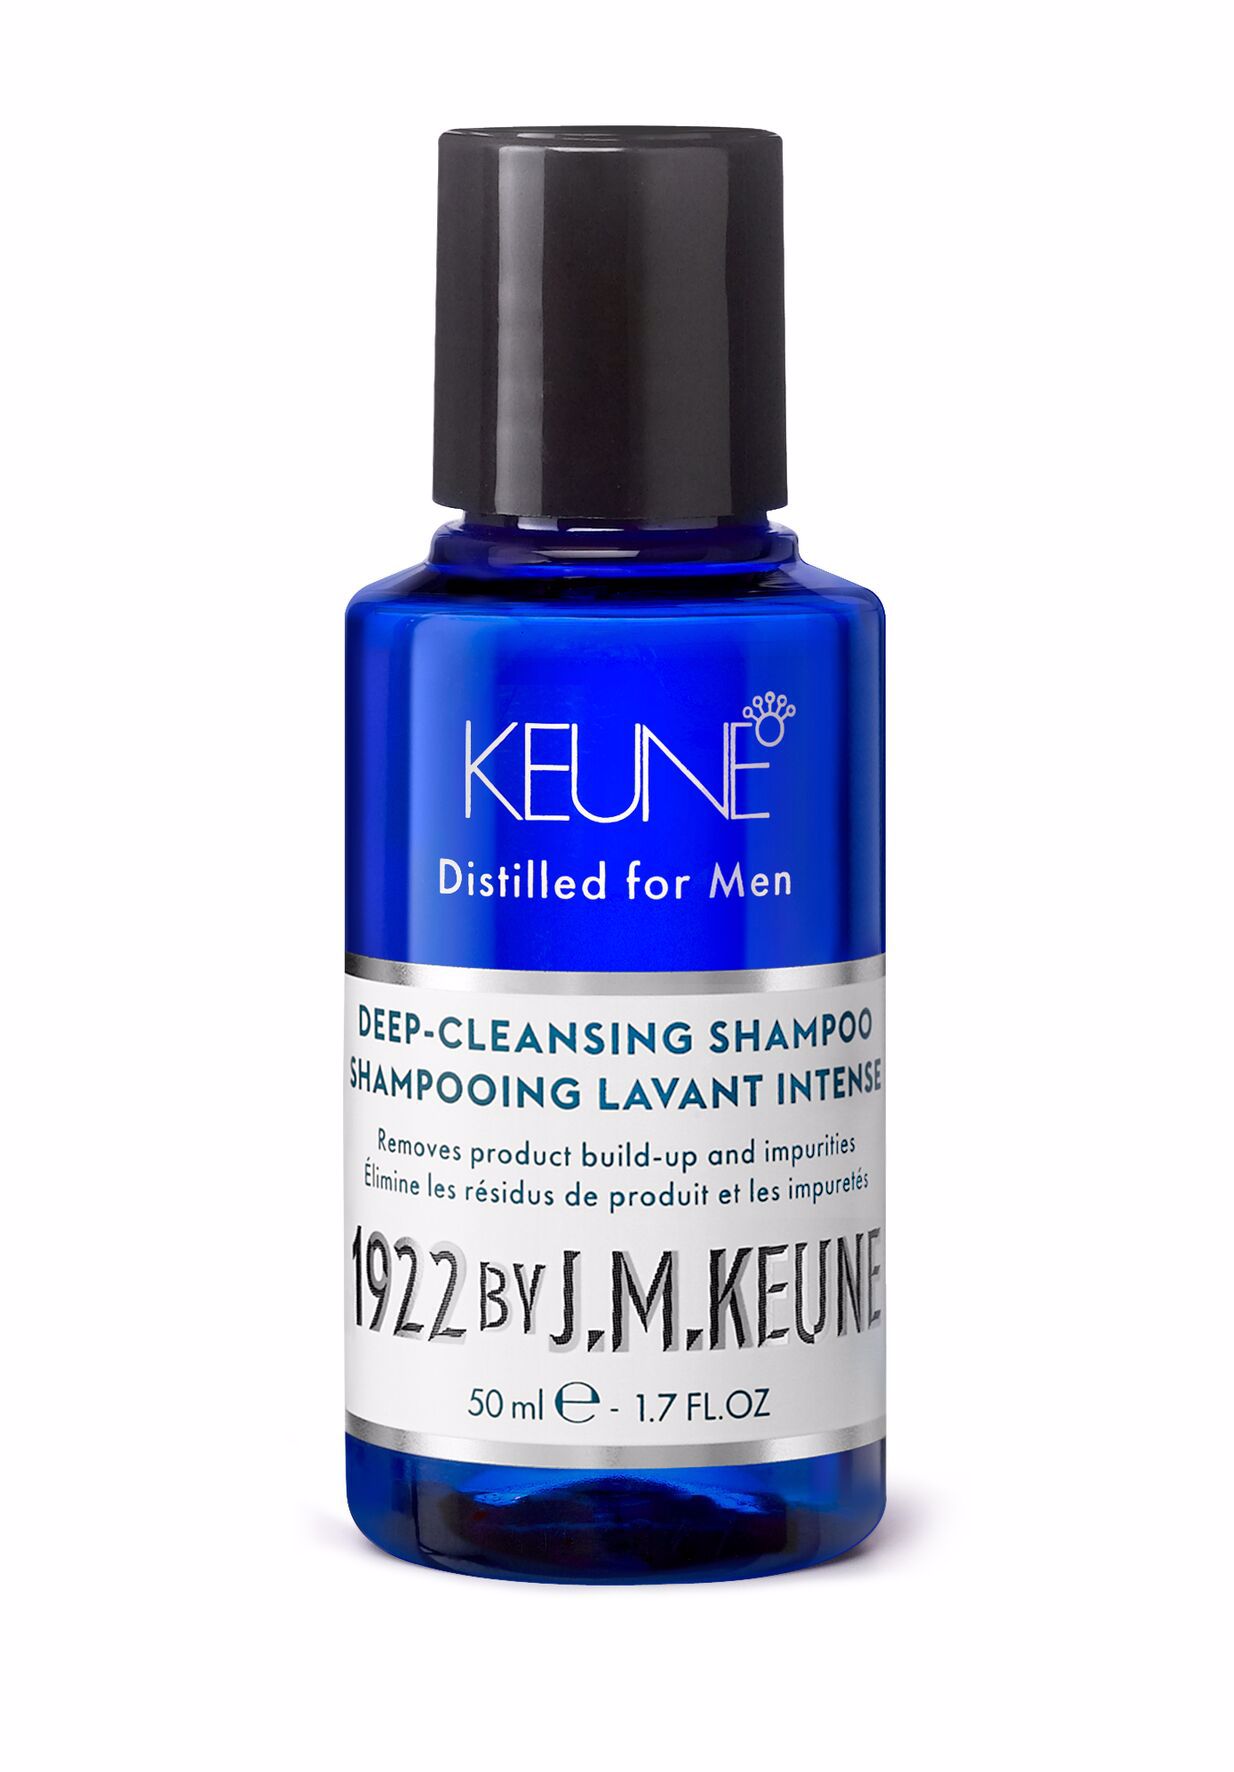 Our Deep-Cleansing Shampoo for men cleanses thoroughly and moisturizes. Creatine and bamboo extract strengthen oily hair. Available on online hair shop Keune.ch.